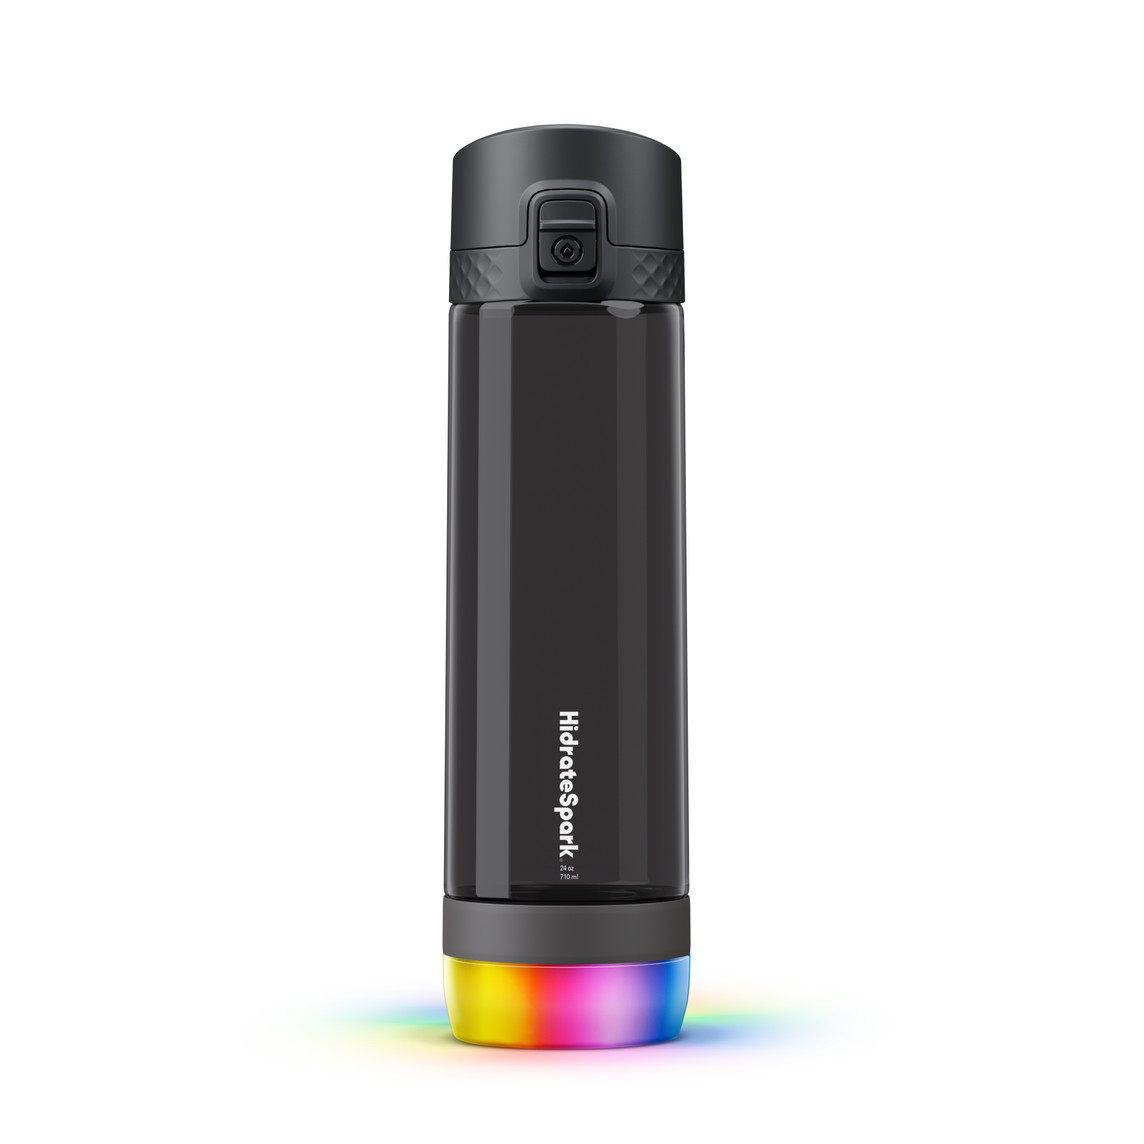 The black shatter-resistant, vacuum-insulated Hi-drateSpark PRO Titan Plastic Smart Water Bottle keeps a 24-ounce beverage cold for up to 24 hours.